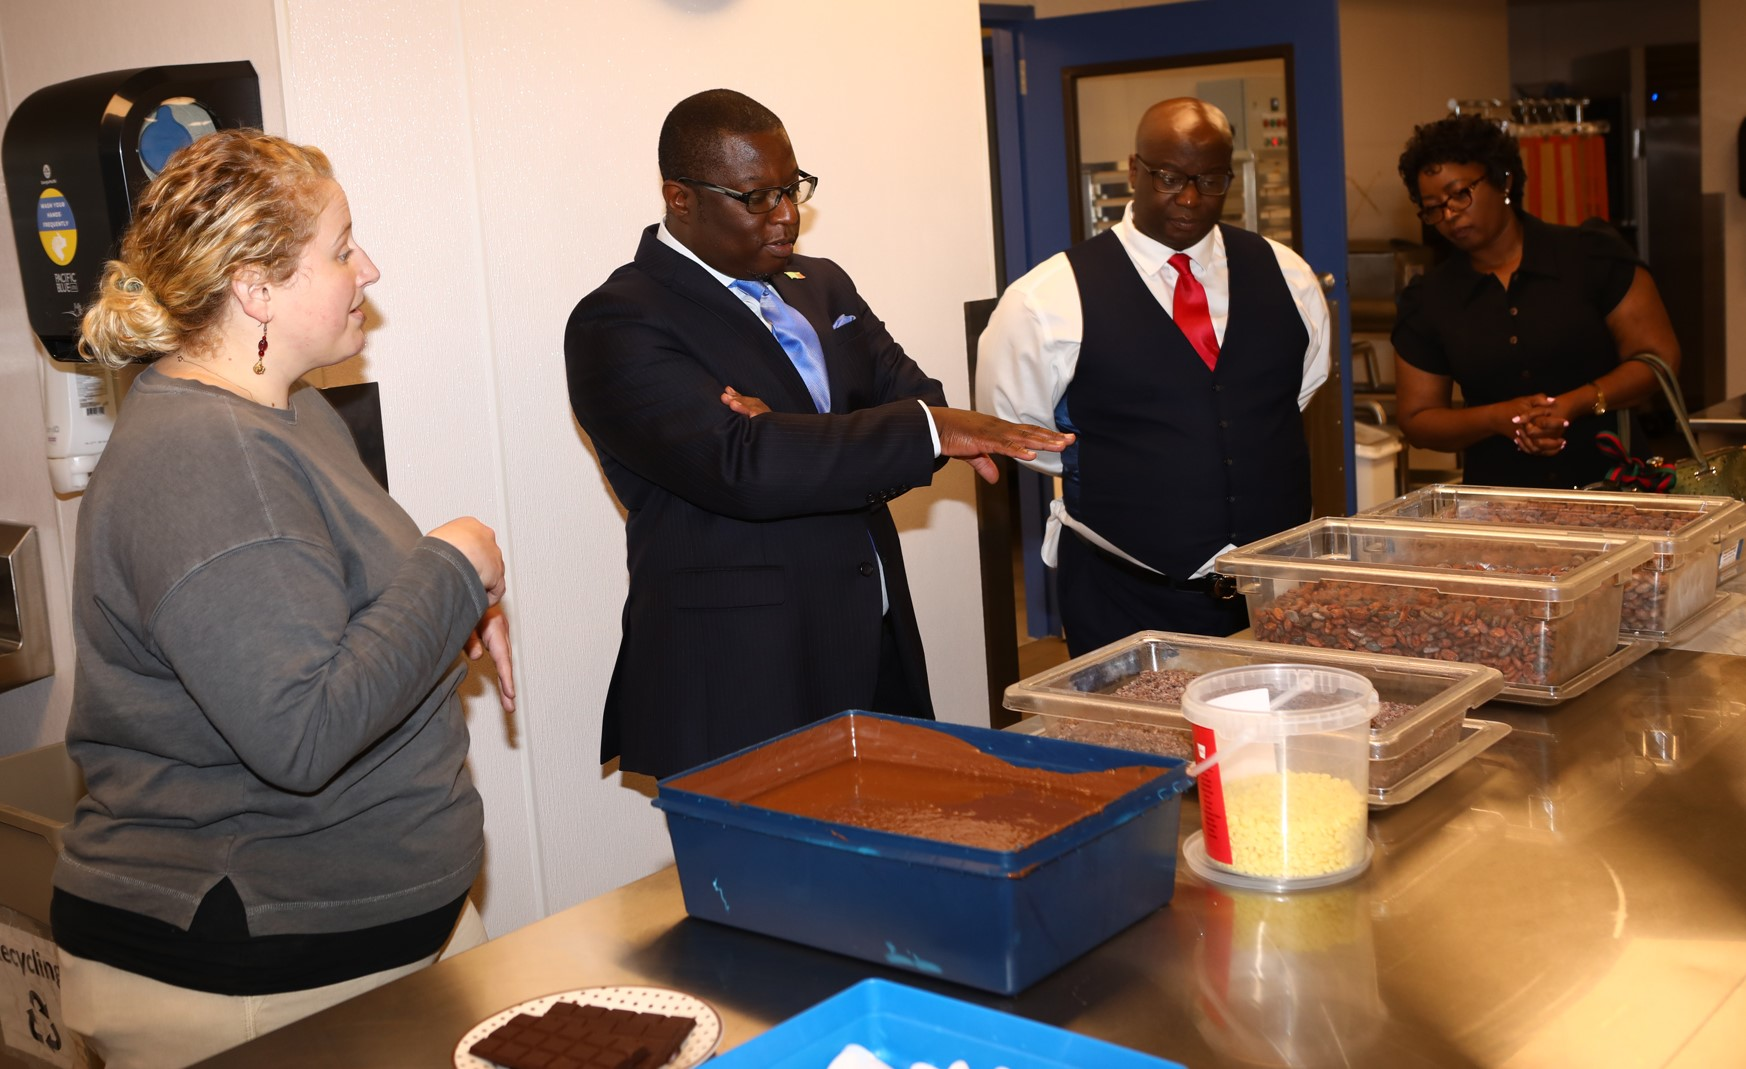 H.E. Amb. Dr. Chola Milambo tours the Confections Lab